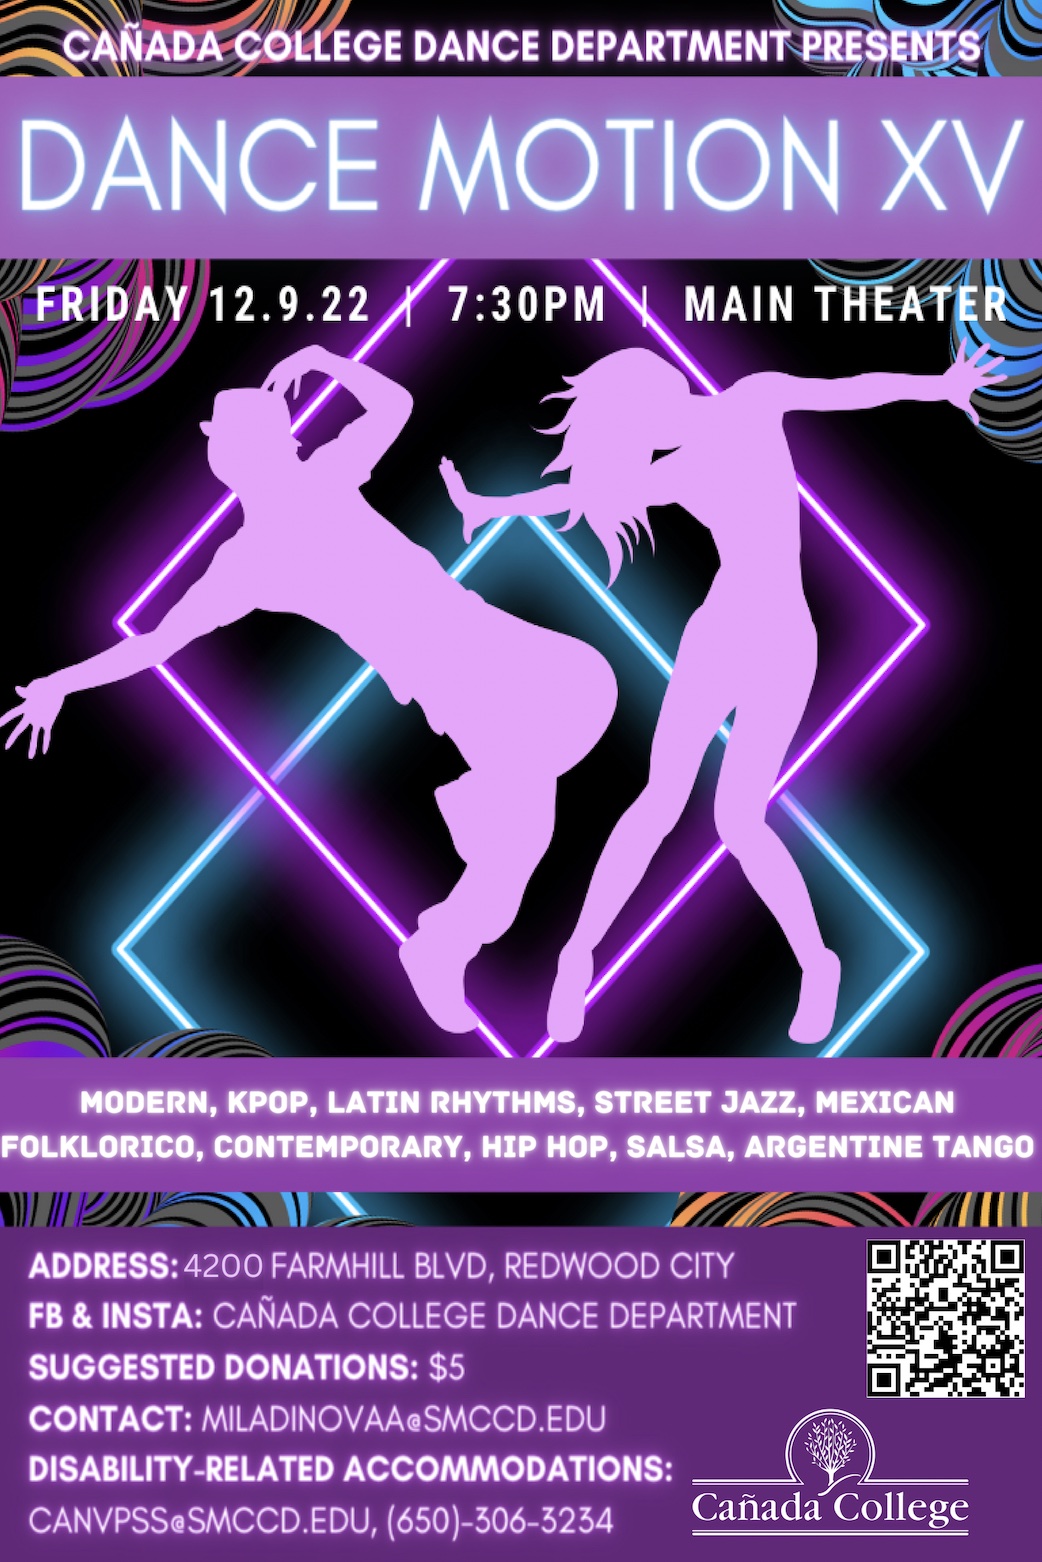 Displays information about the dance show on Friday December 9th at 7:30pm at our college, main theater